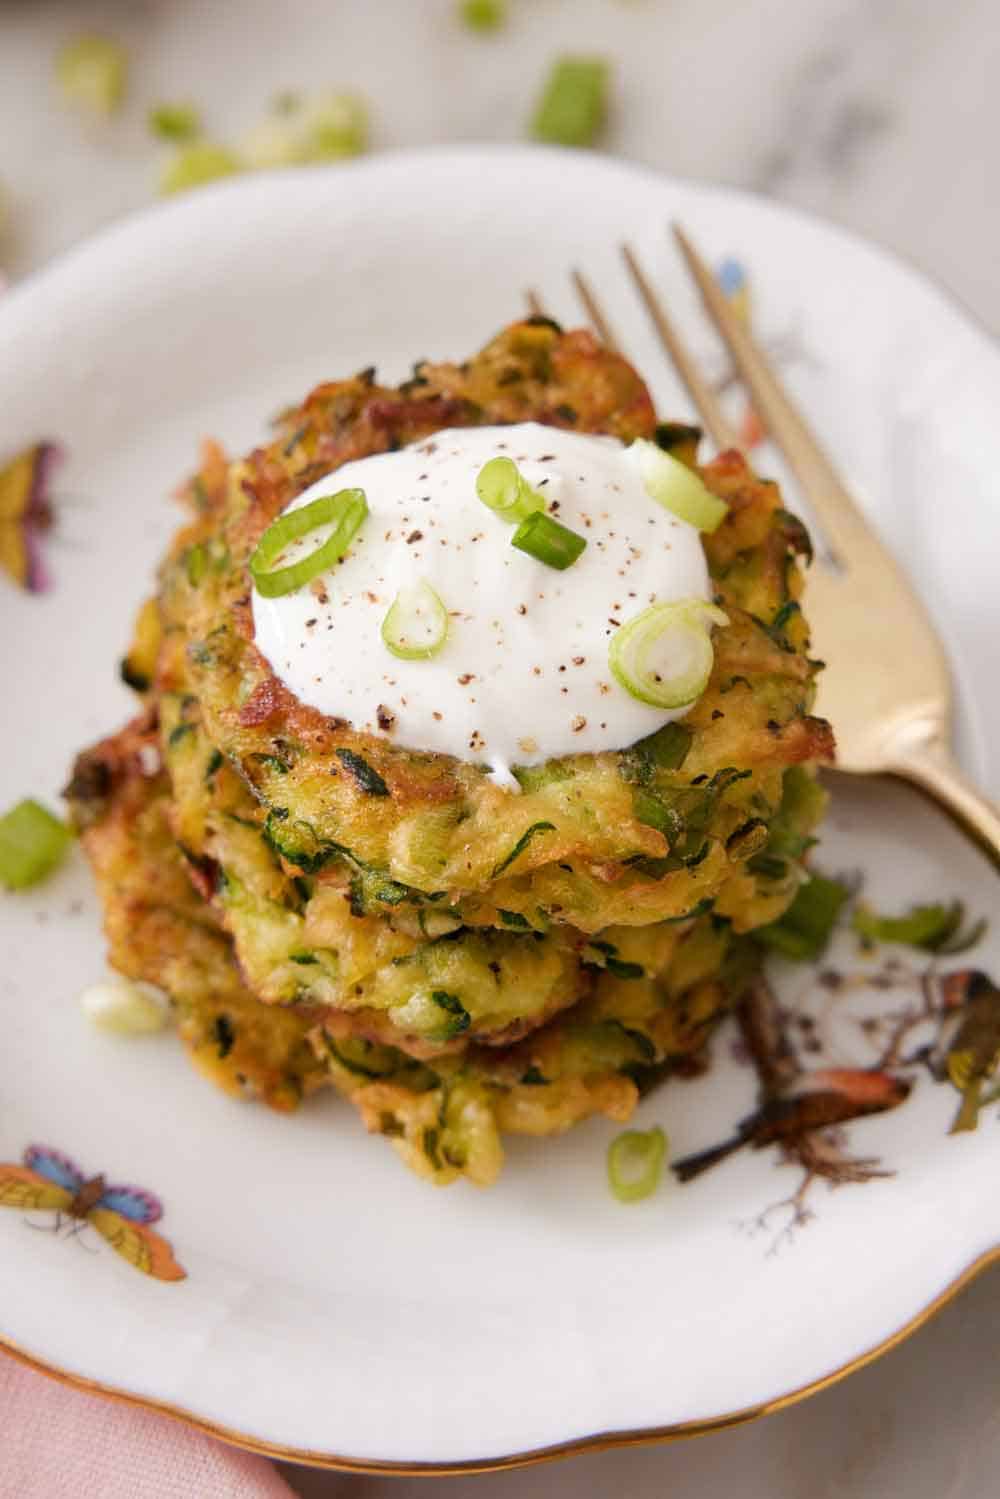 A plate with a stack of zucchini fritters with a dollop of sour cream on top, garnished with green onions.